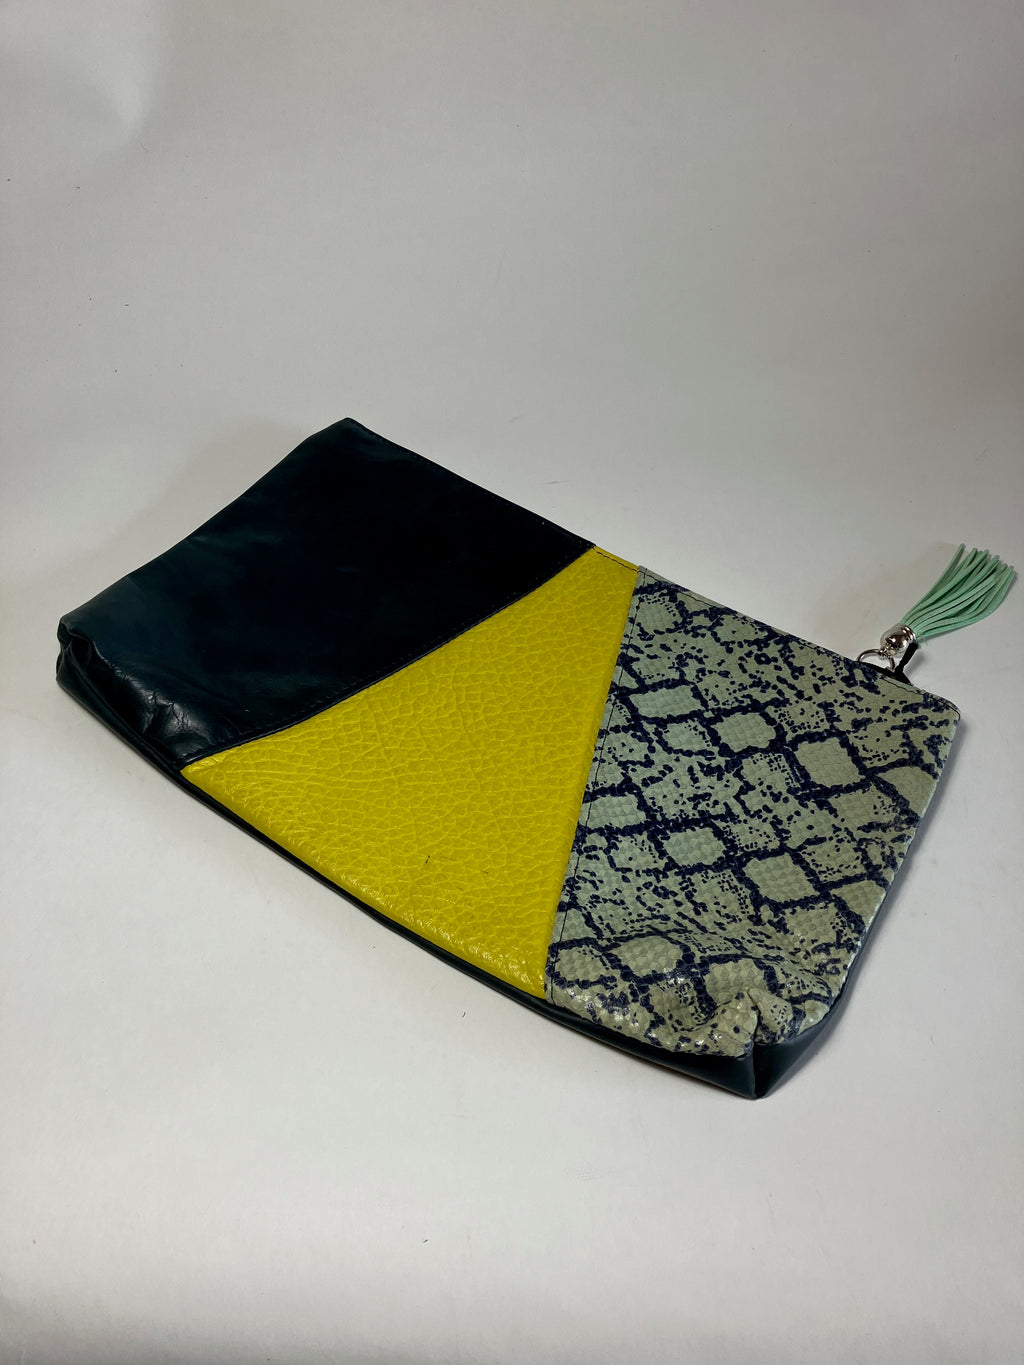 ONE OF A KIND - SAMPLE Leather clutch bag deep blue and yellow